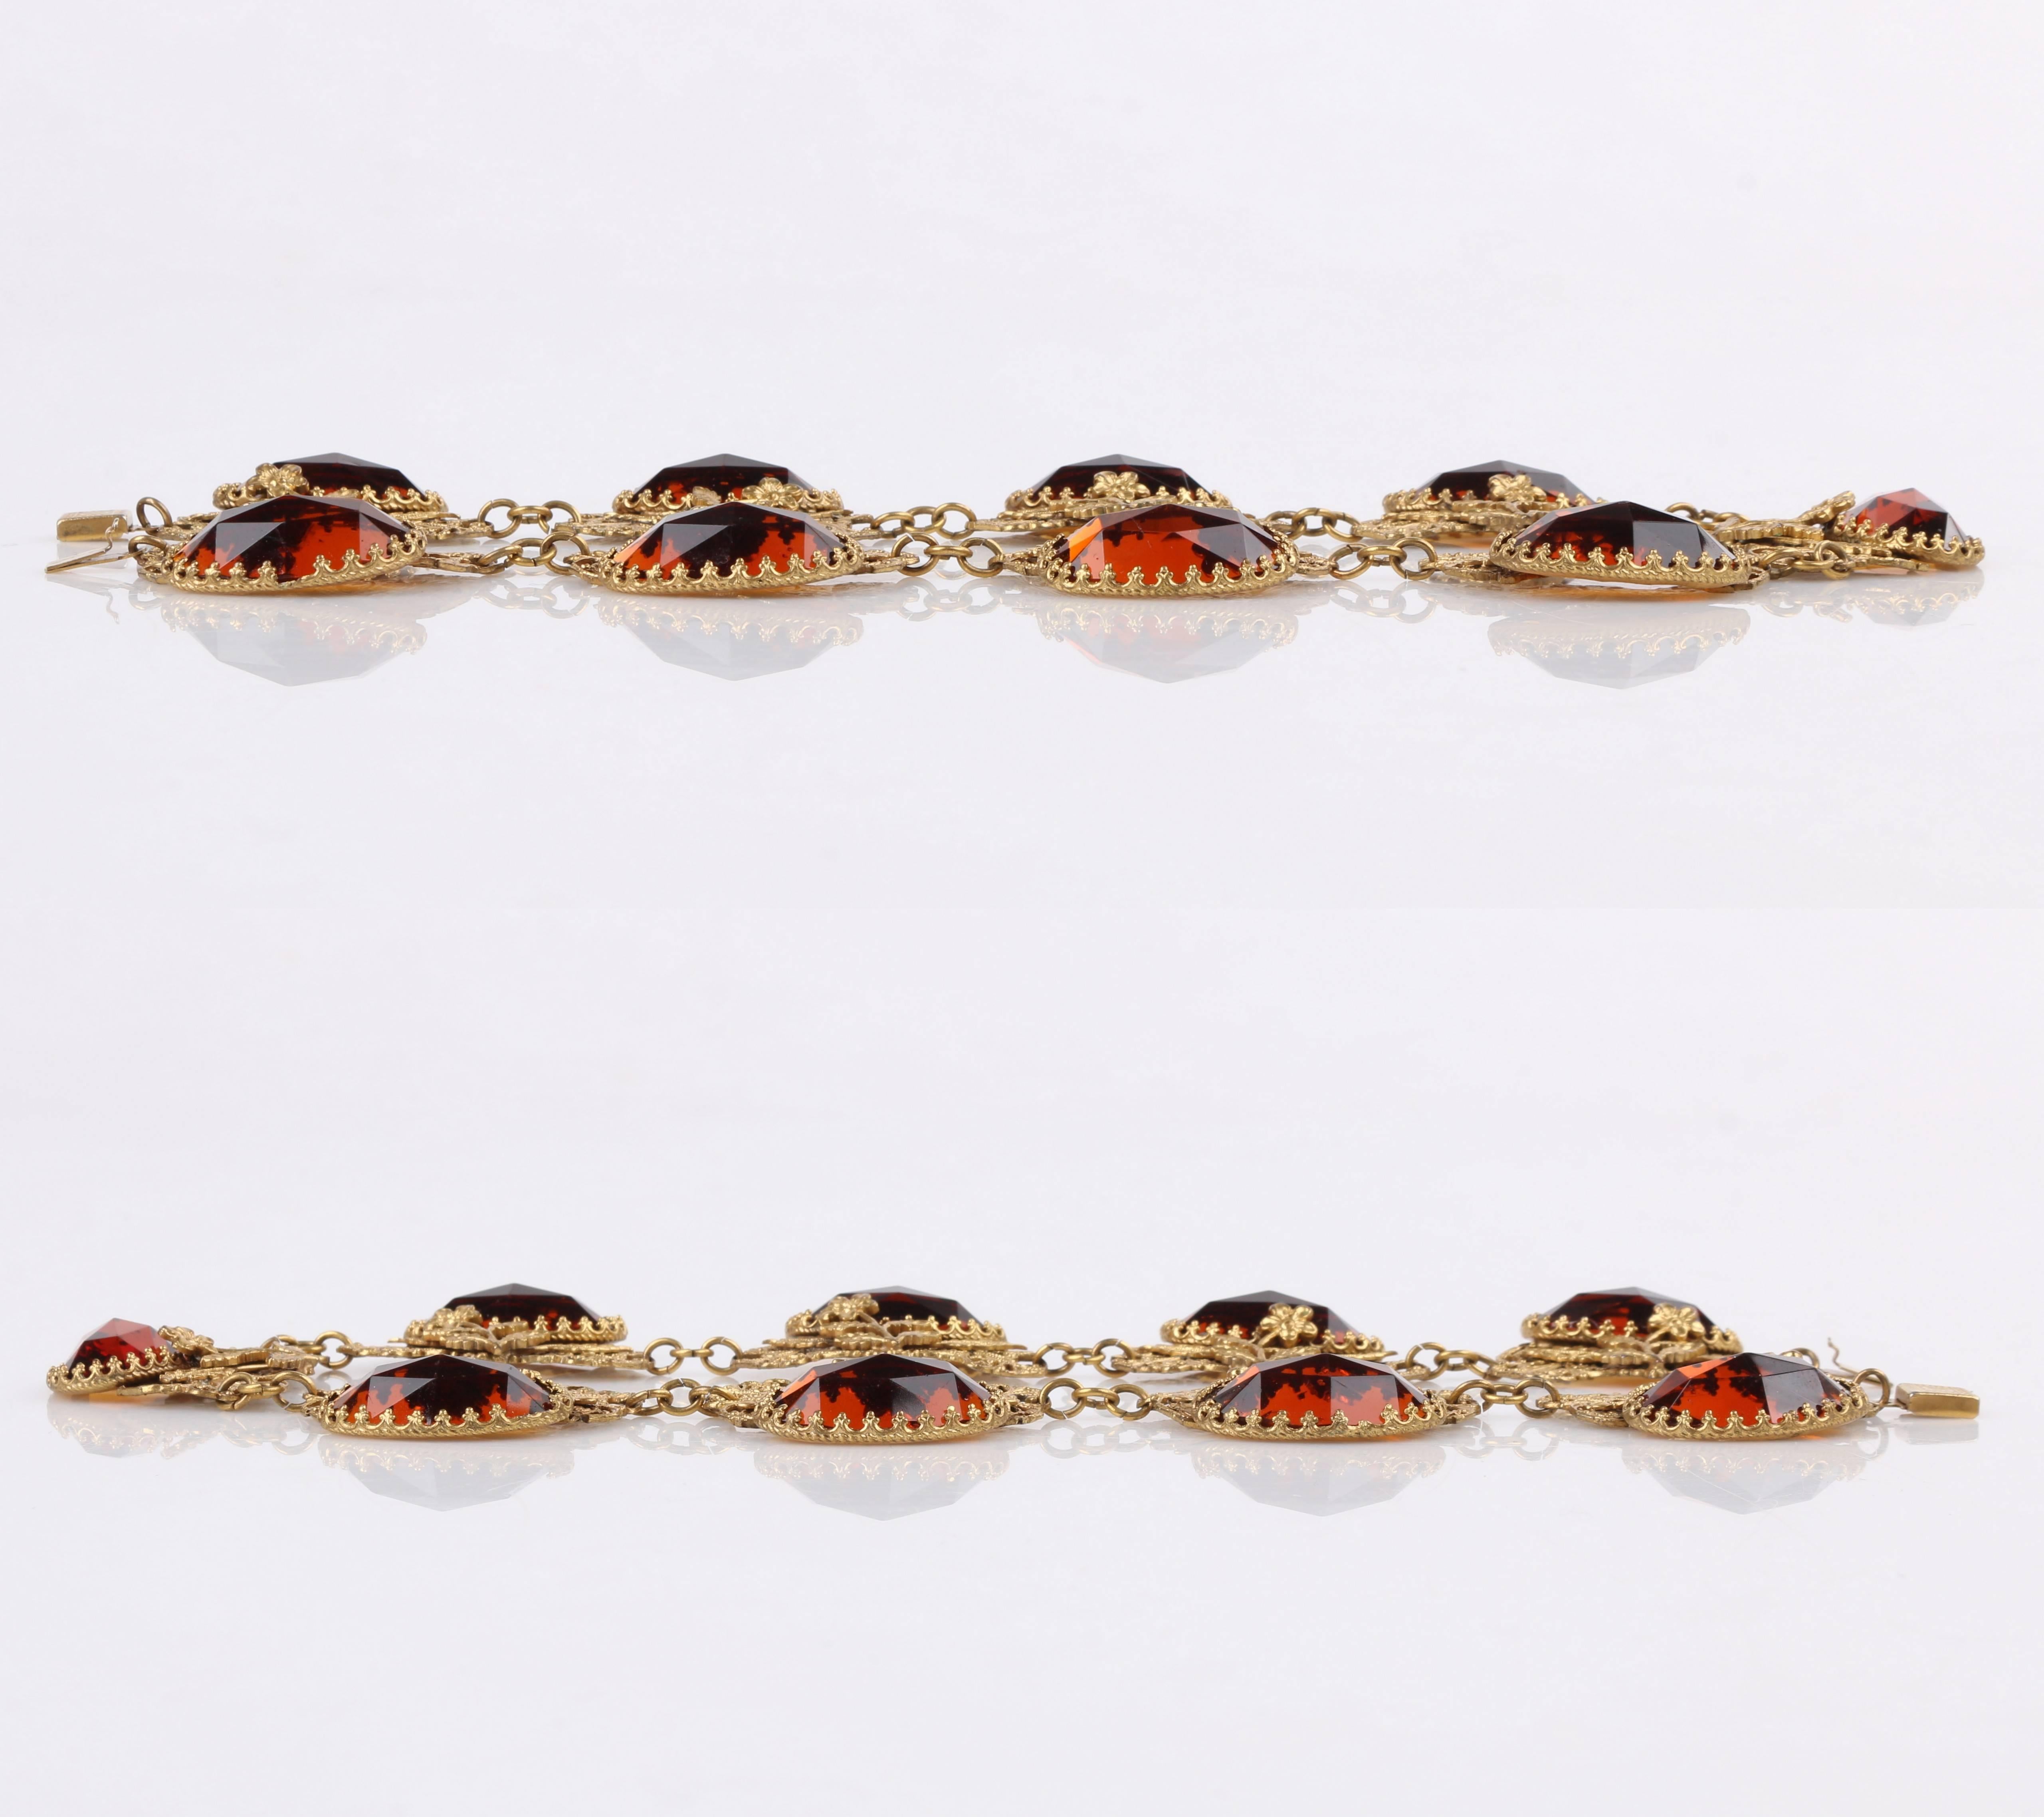 ART NOUVEAU c.1930's Floral Filigree Brass & Amber Czech Glass Choker Necklace In Excellent Condition For Sale In Thiensville, WI